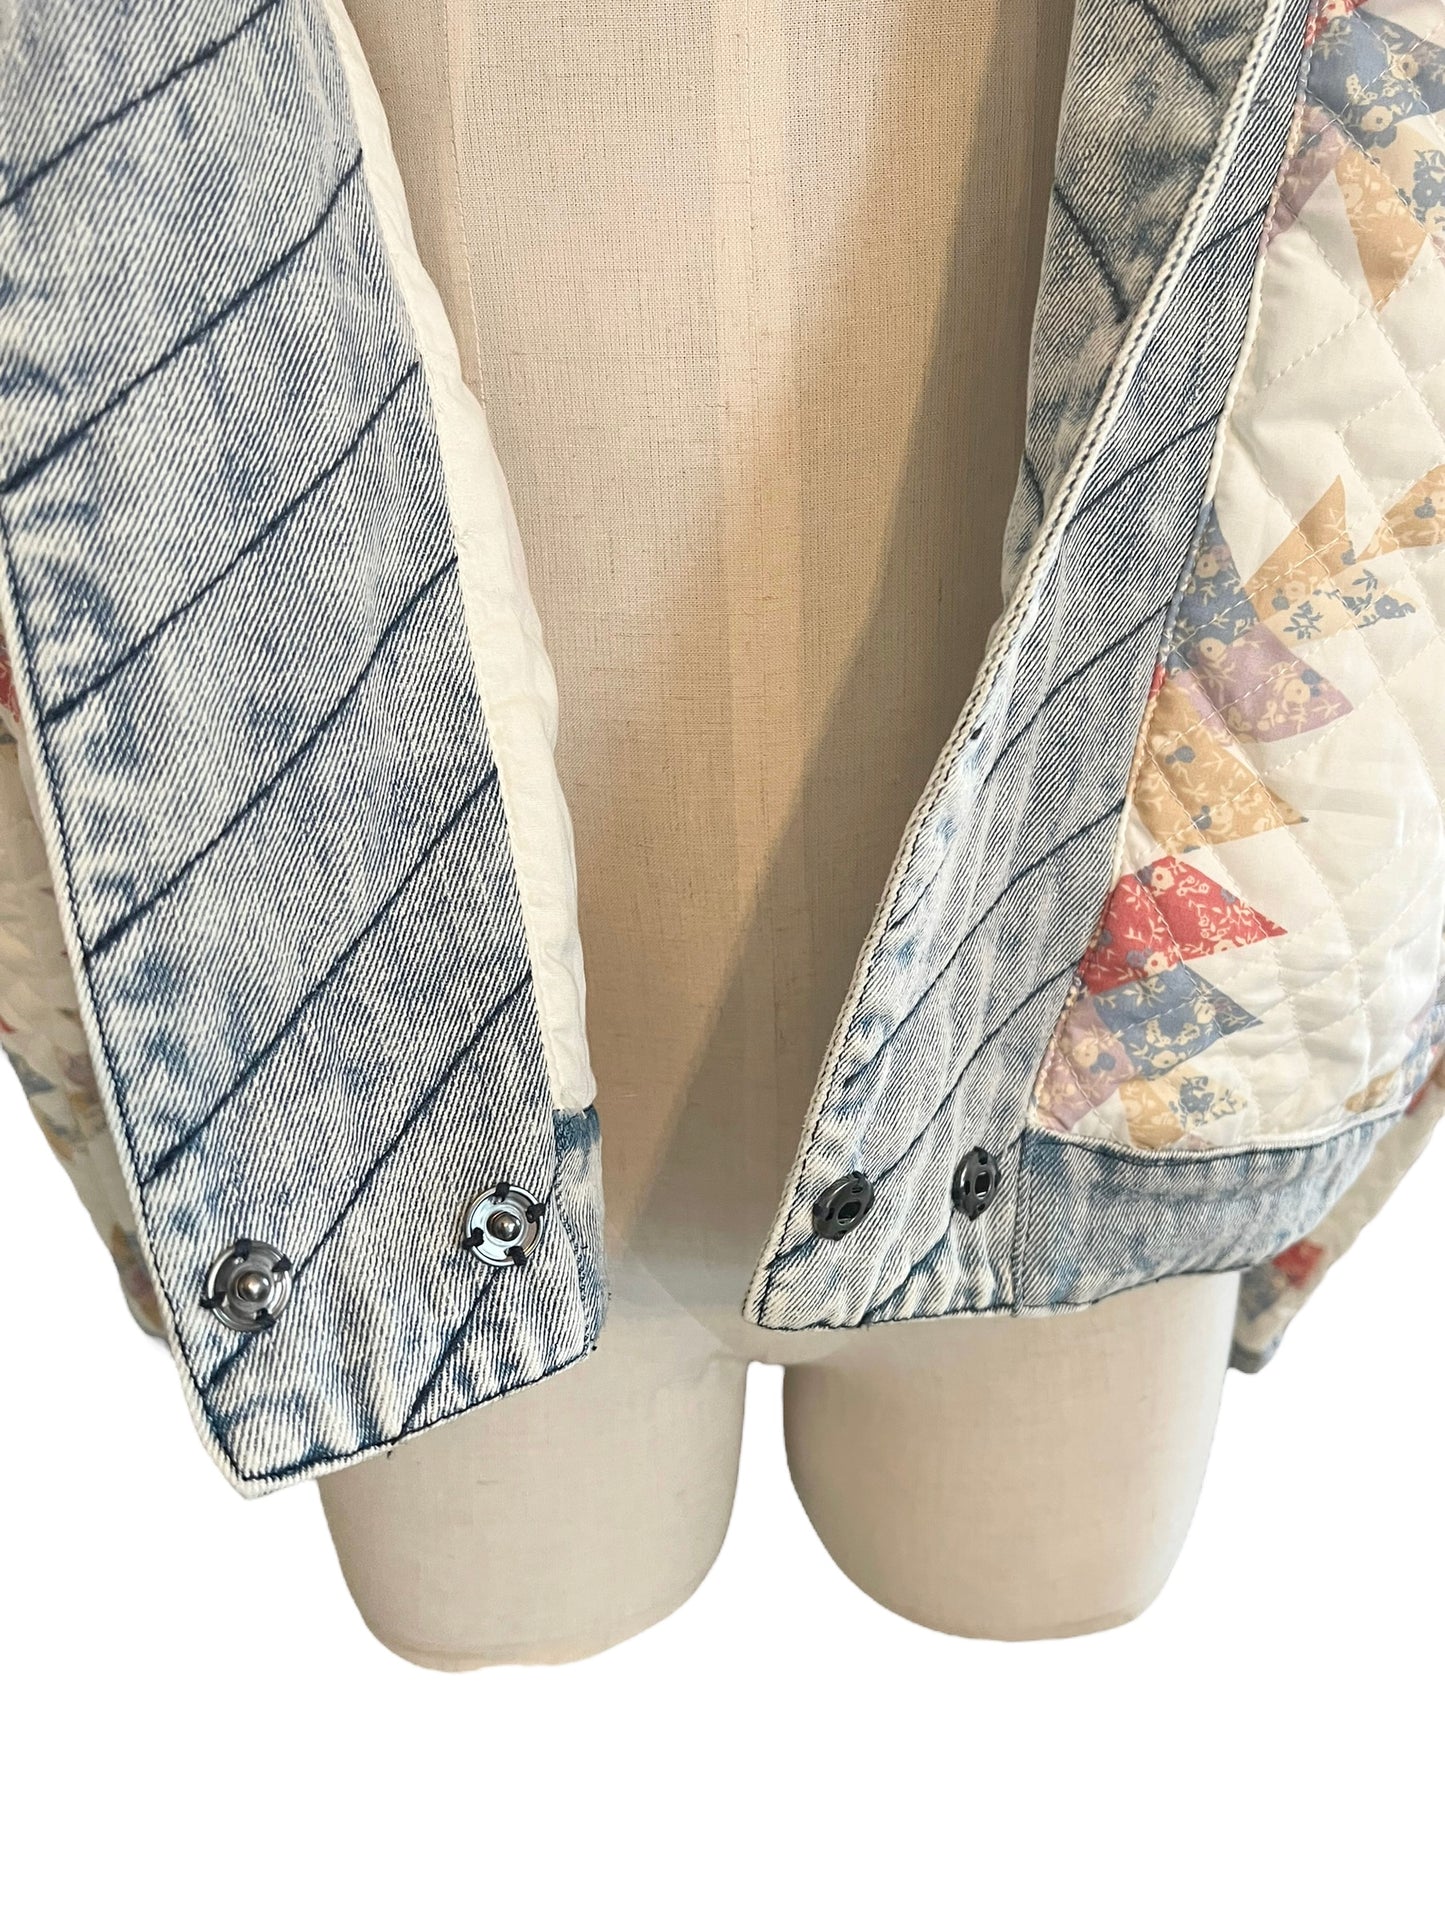 Blank NYC Quilted Patchwork 'Making Memories' Size L Jacket